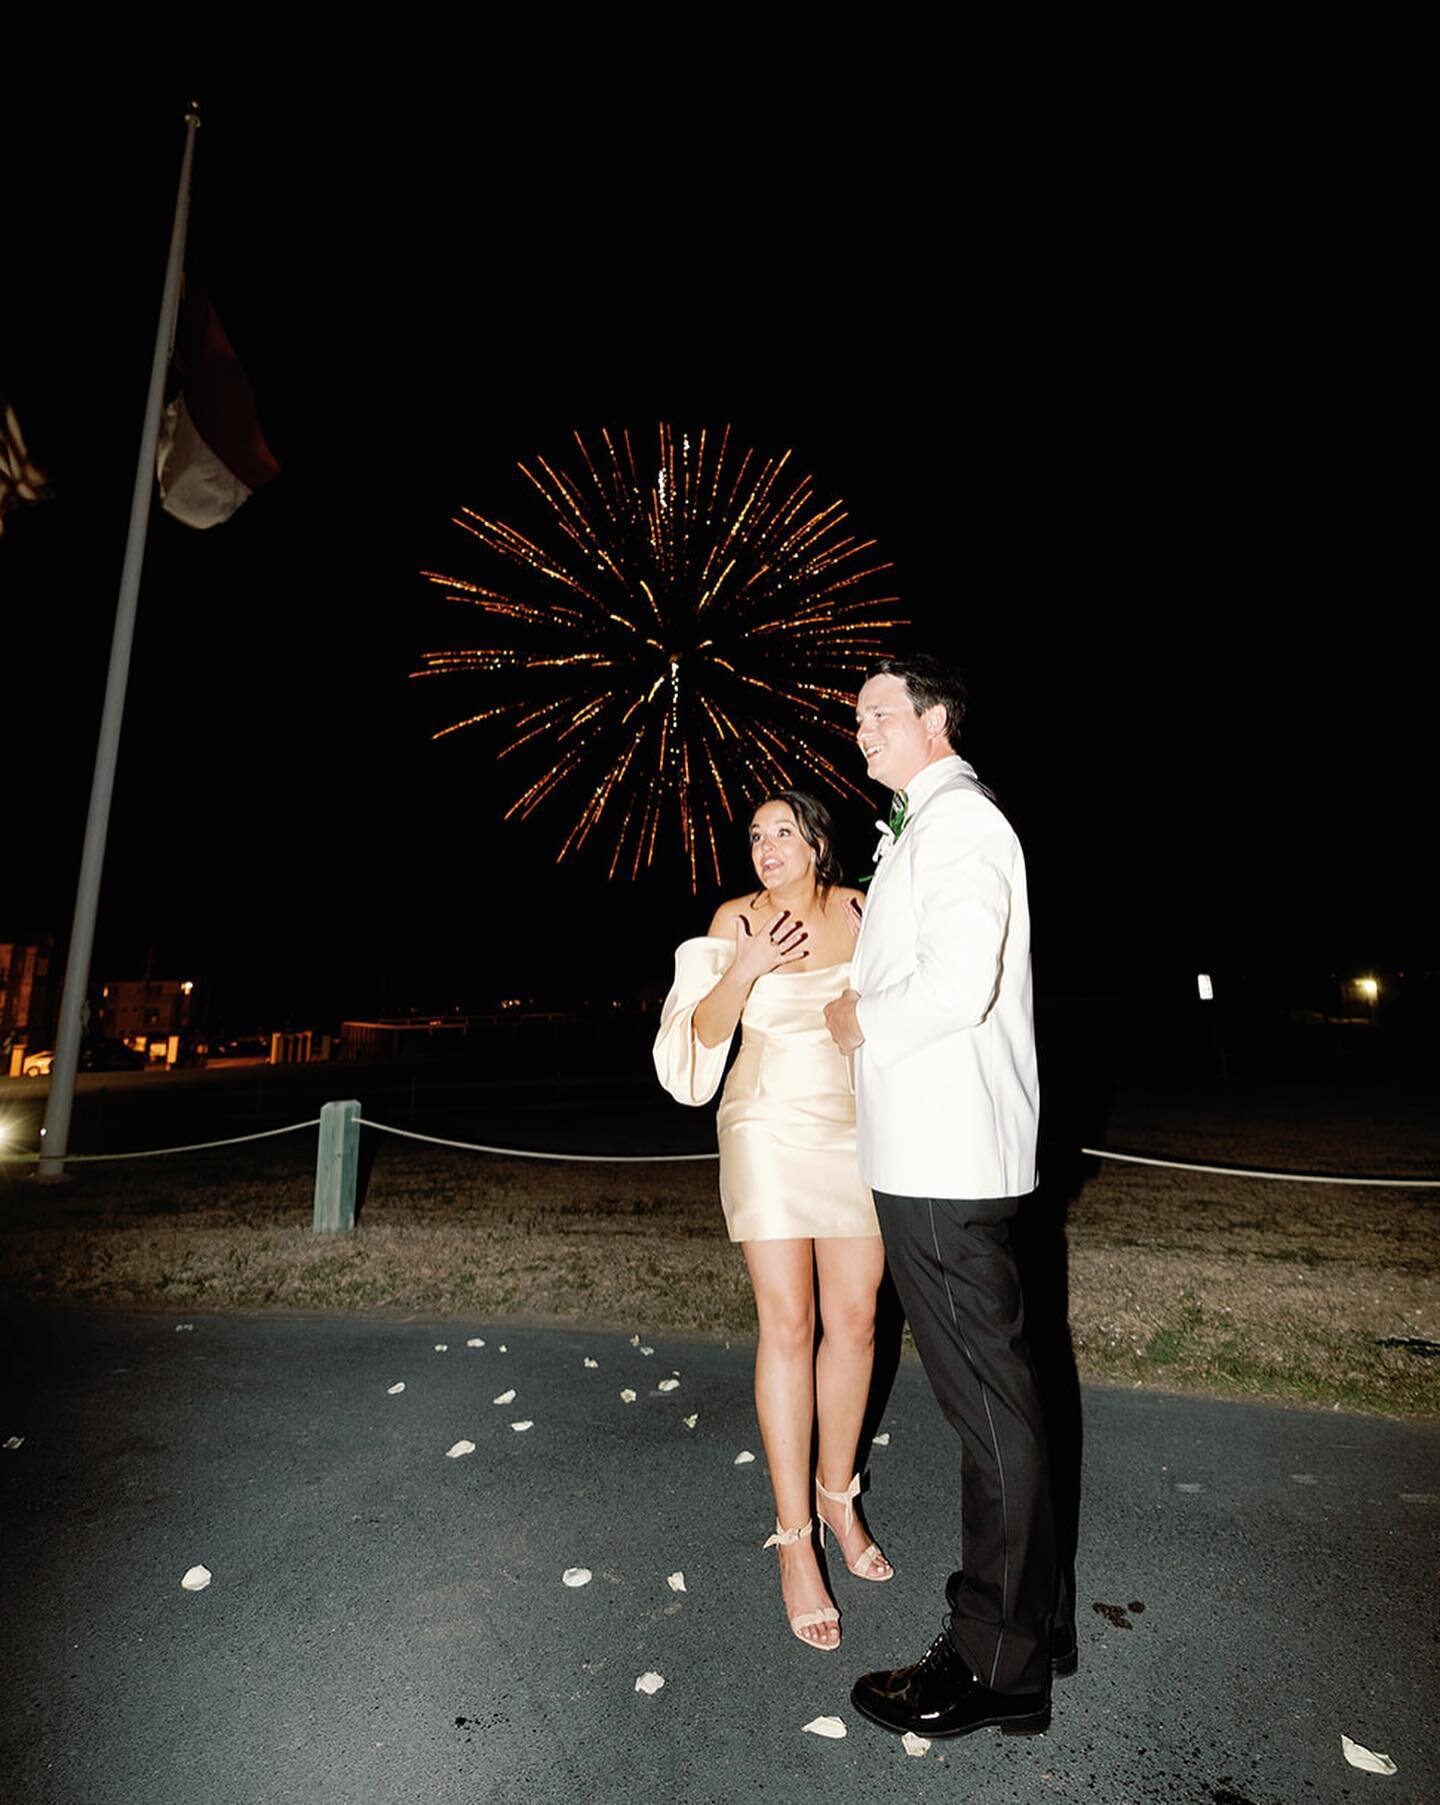 We love a firework finale (especially when it&rsquo;s a surprise!) 🎇 Wishing everyone a cheerful and safe 4th of July! 🇺🇸

#asouthernsoiree #destinationwedding #destinationweddingplanner #fireworks #weddingfireworks #beachwedding #coastalwedding #